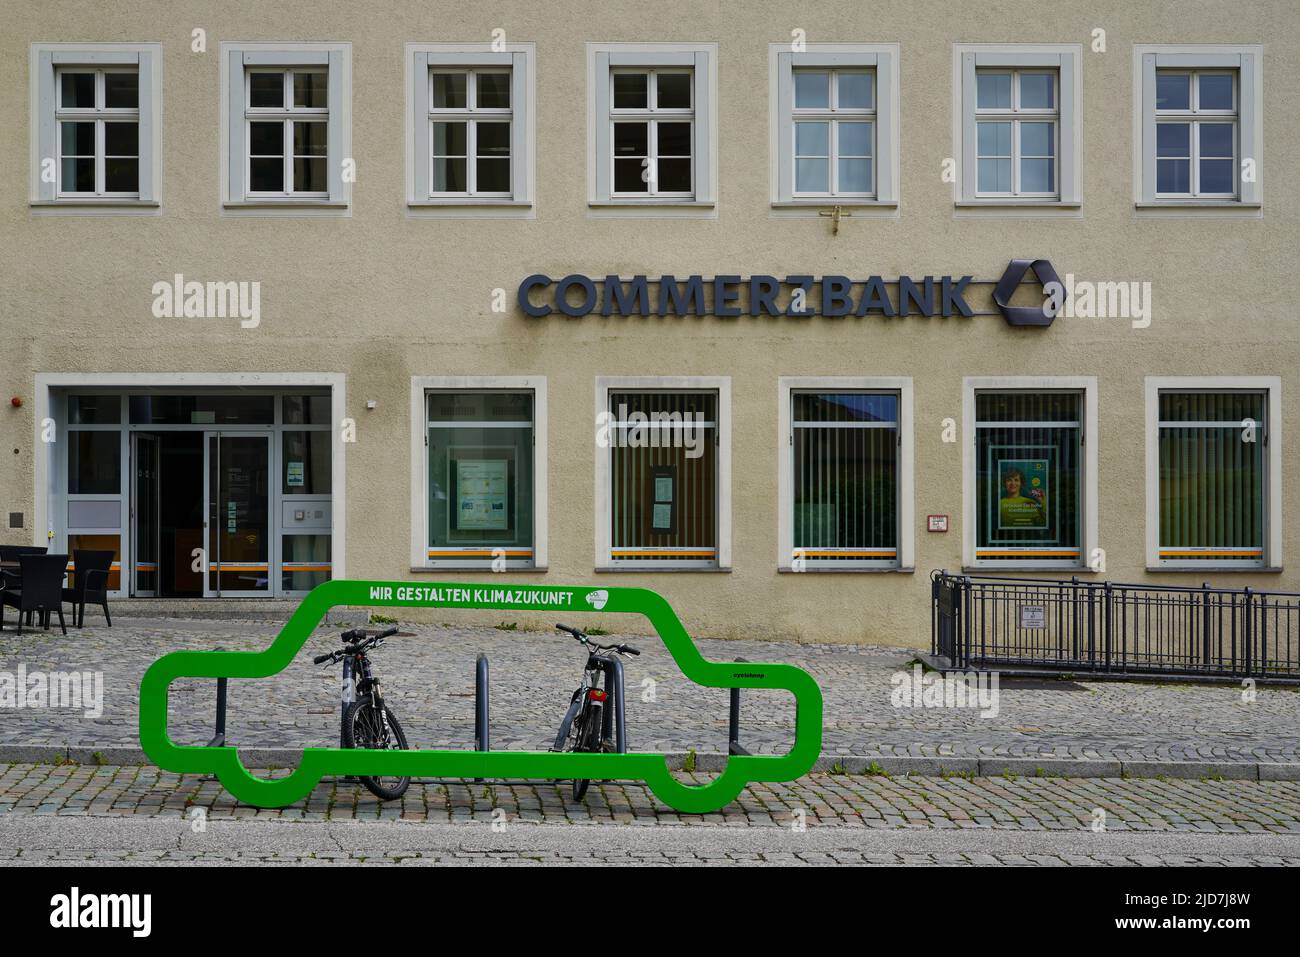 A Commerzbank branch in Ravensburg, in front a green bicycle rack with the slogan: We are creating climate future, Baden-Württemberg, Germany, 6.6.22 Stock Photo